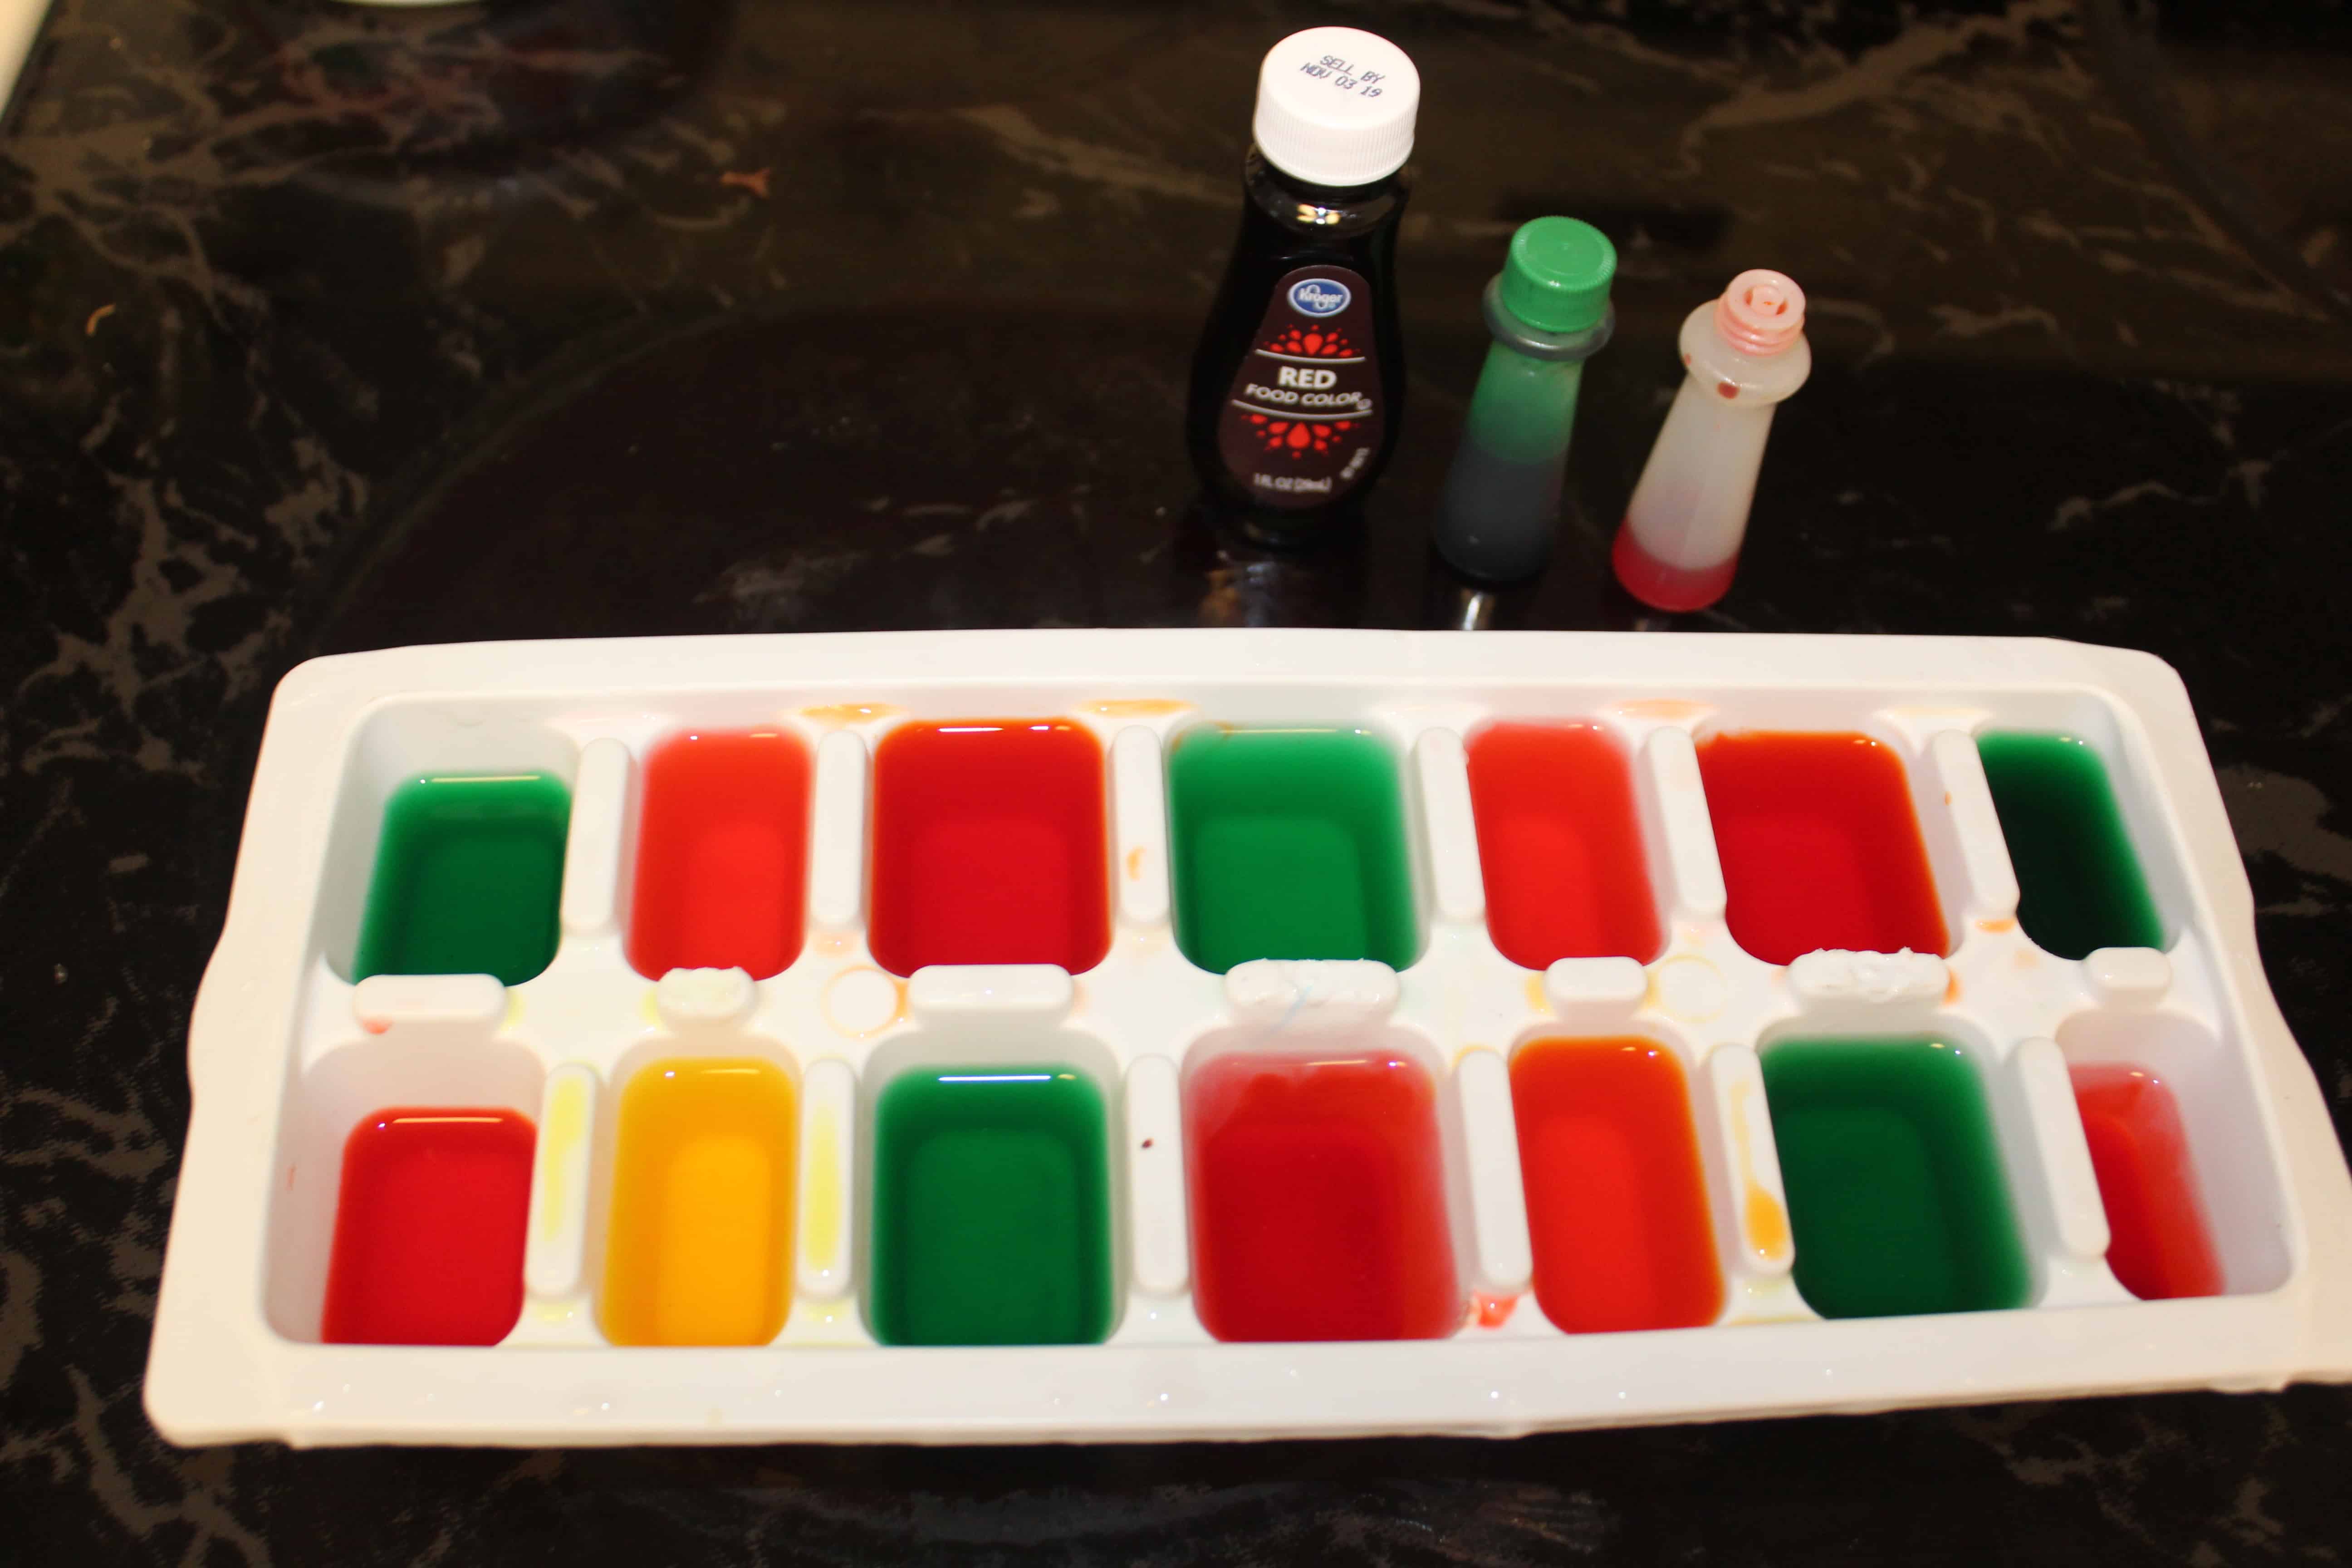 Ice tray full of red, orange, green and yellow food dye paint